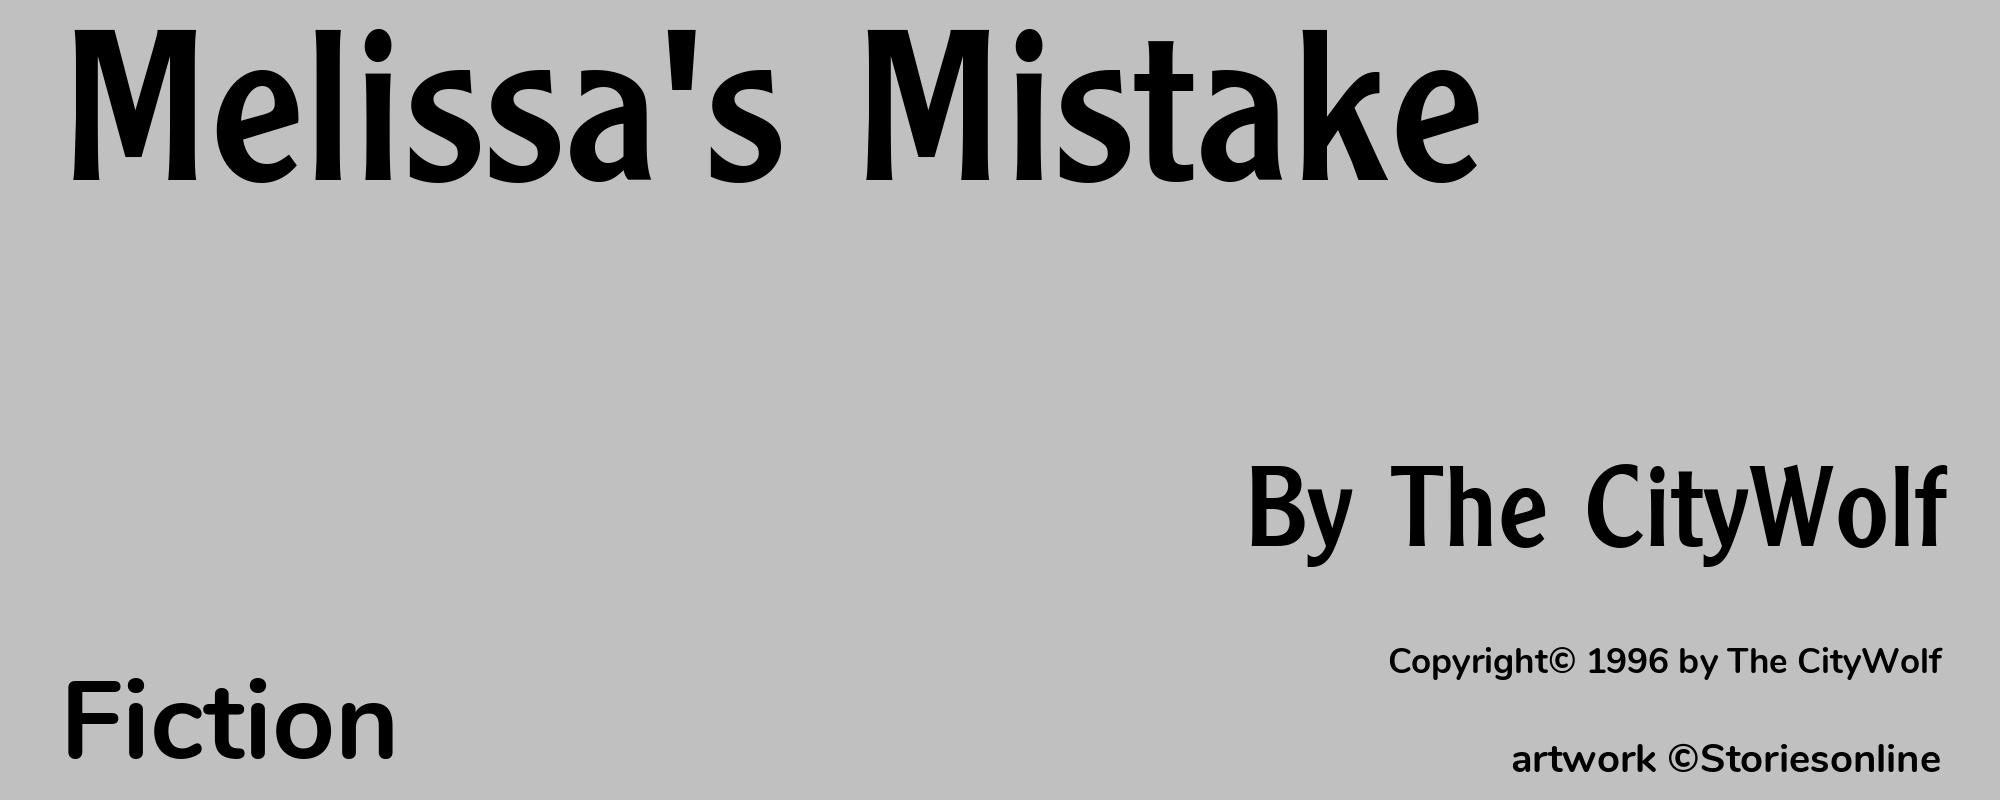 Melissa's Mistake - Cover